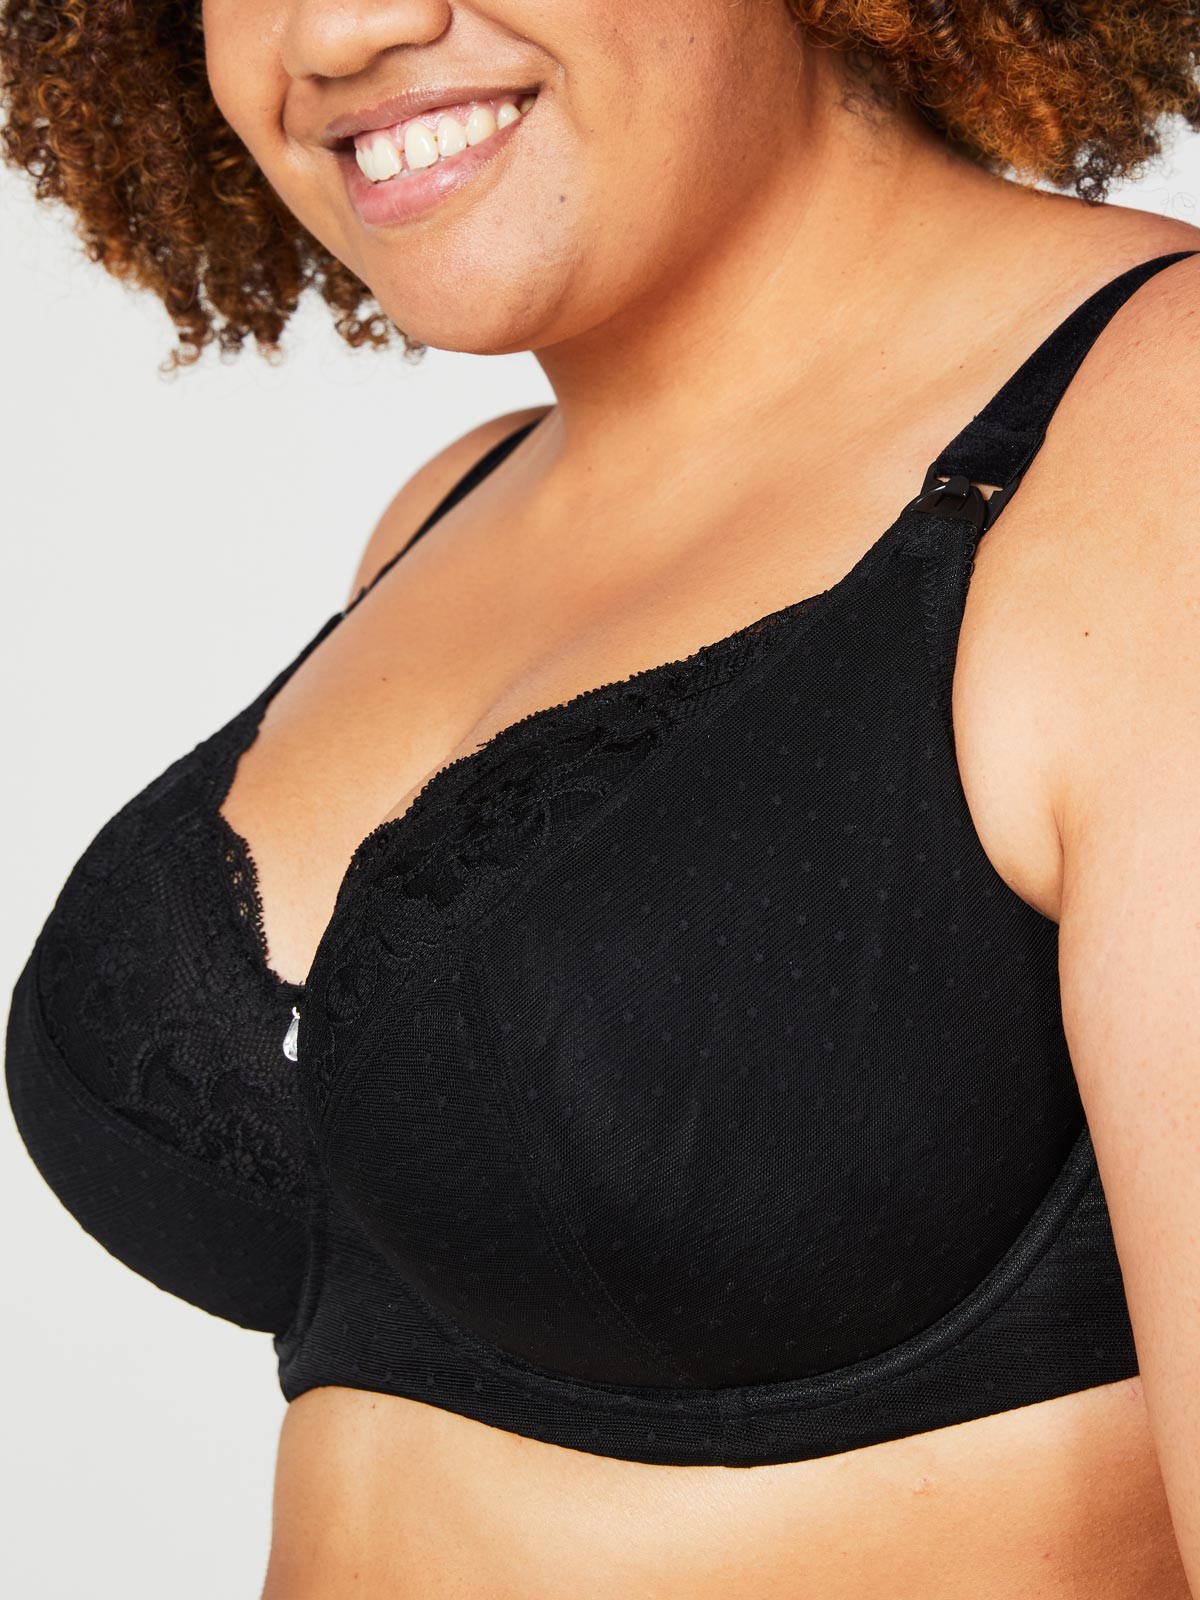 Cake Maternity Frosted Parfait Flexi Wire Lace Nursing Bra Review: 32H -  Big Cup Little Cup